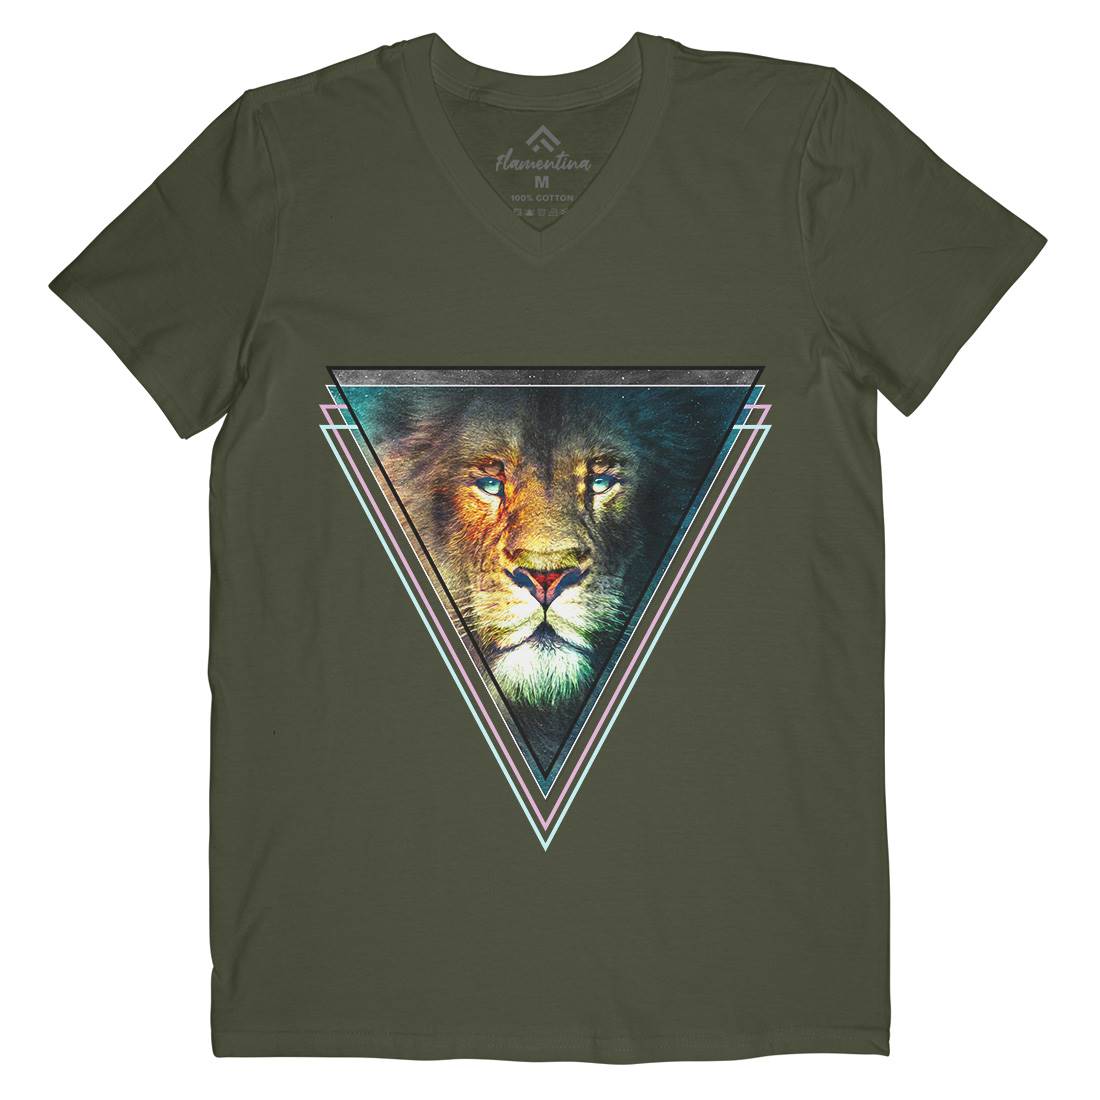 Double Vision Mens Organic V-Neck T-Shirt Space A825